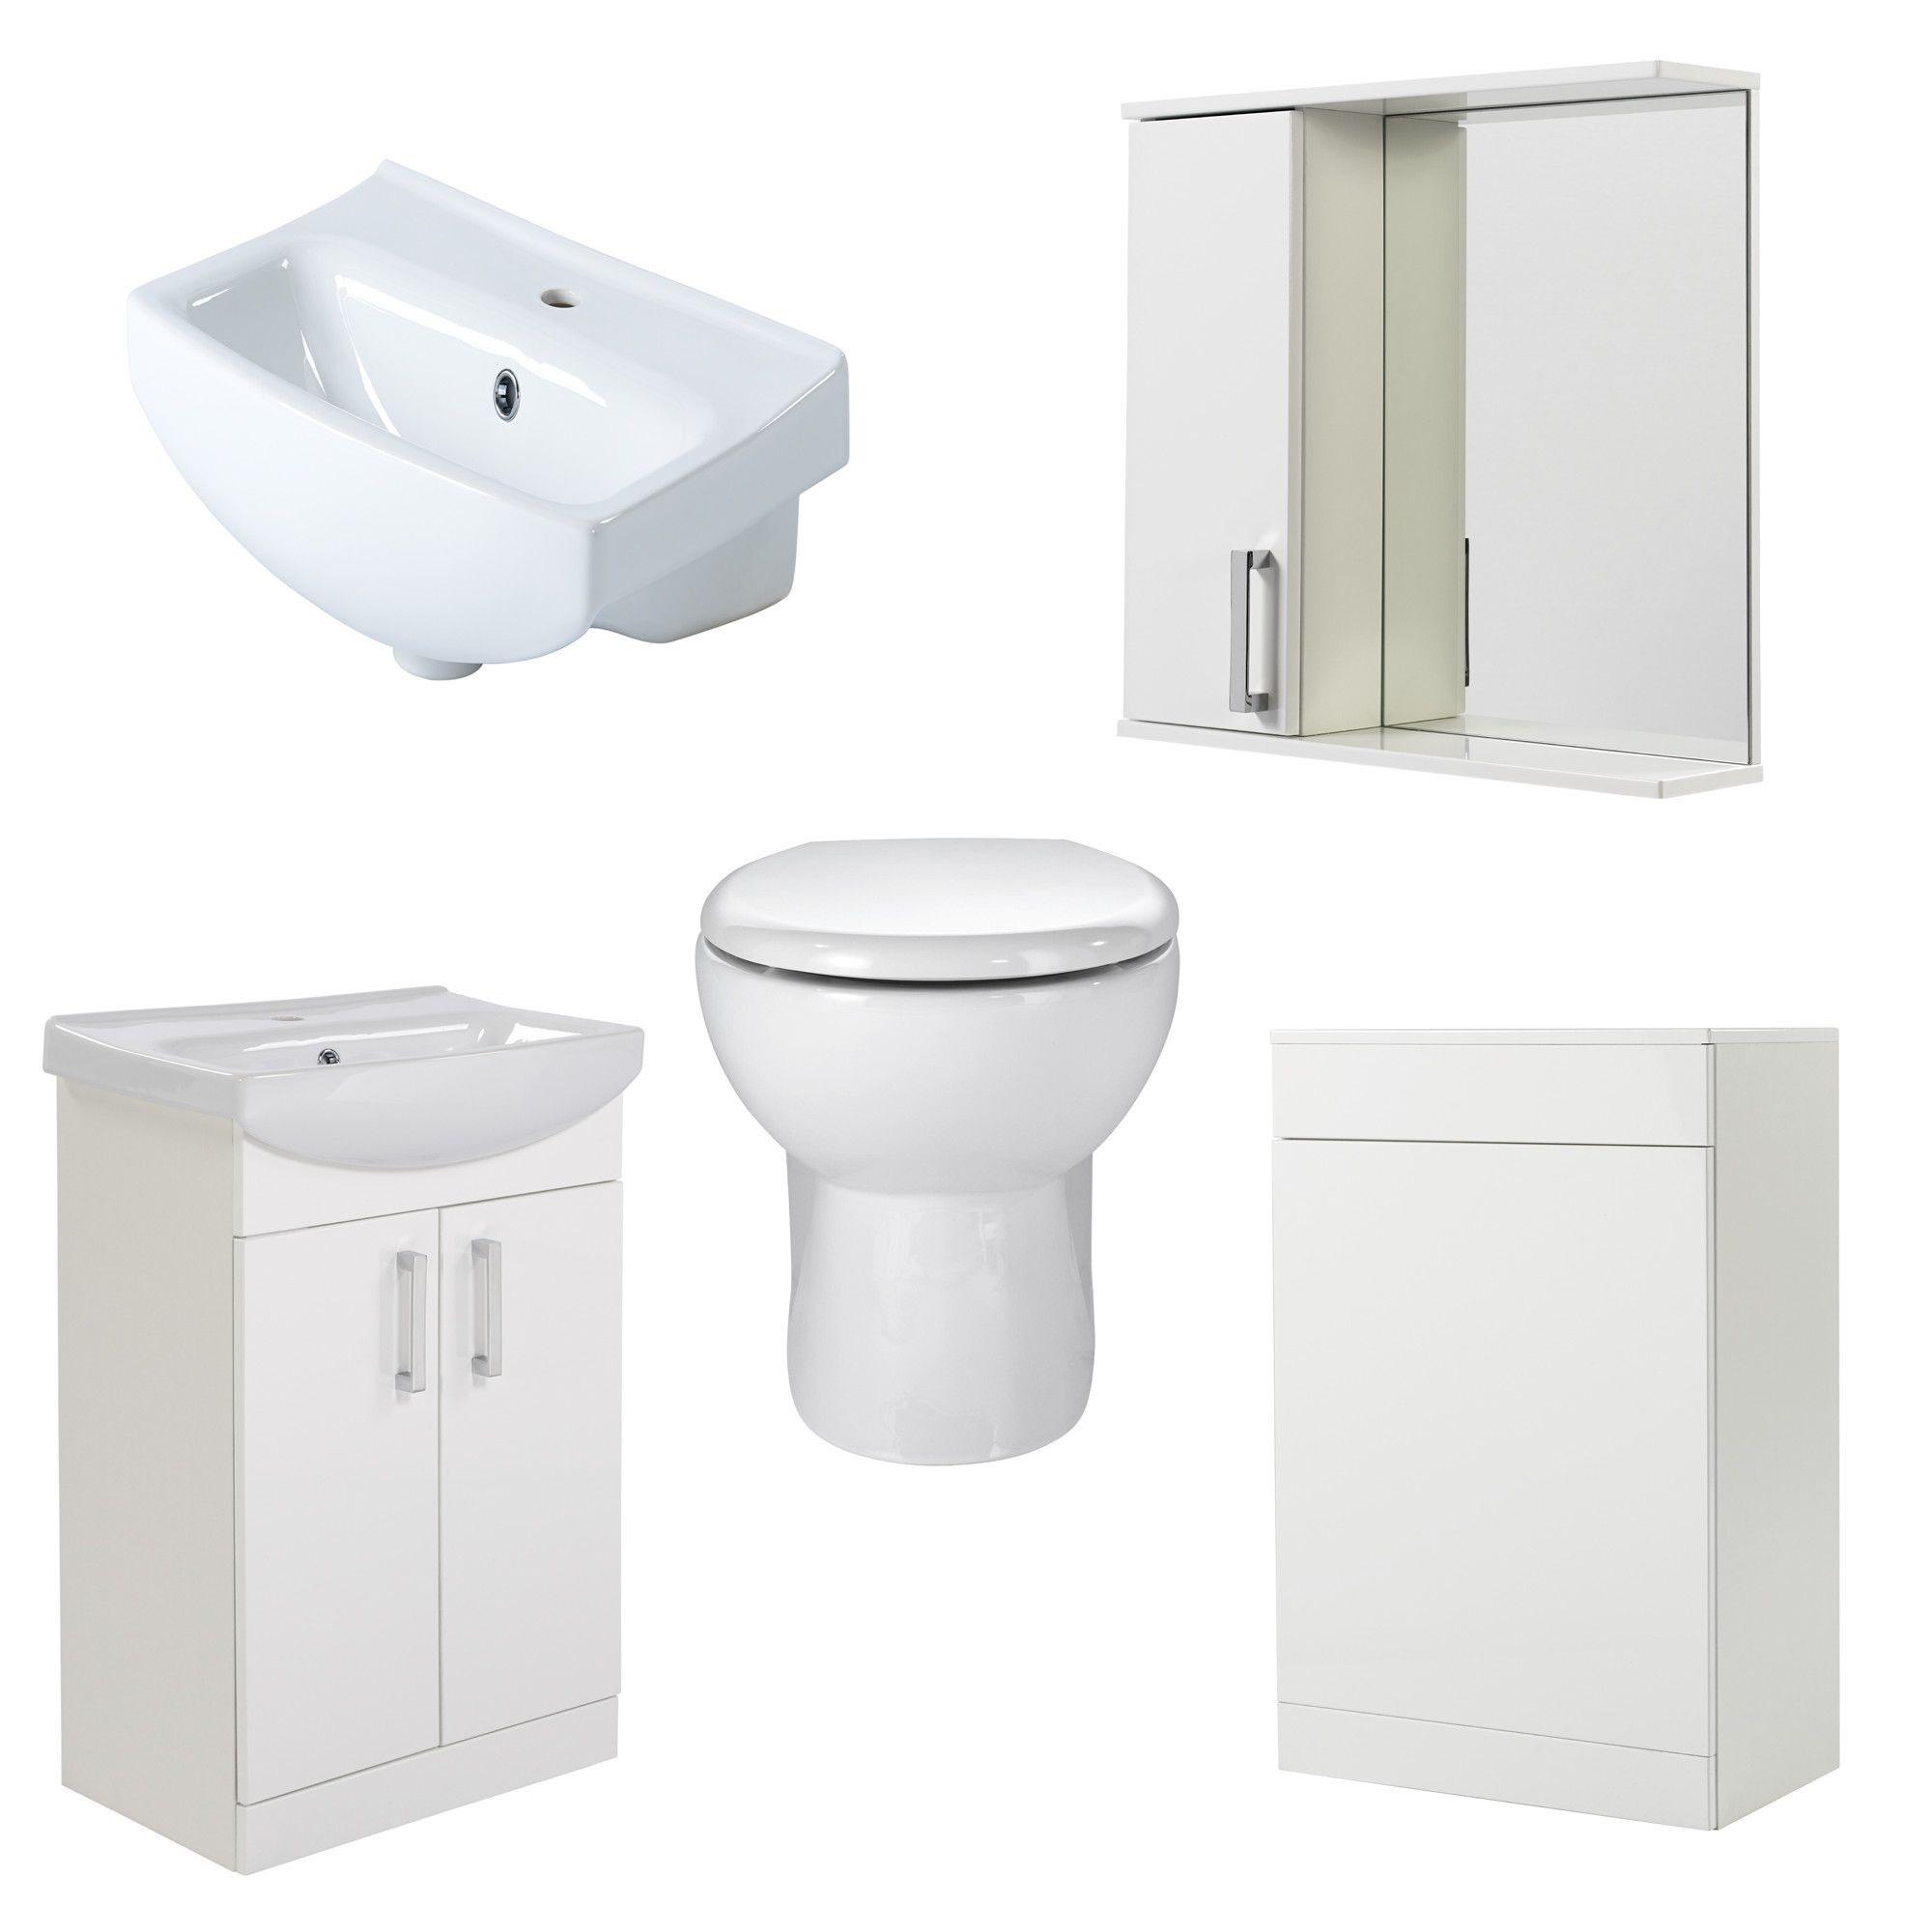 GoodHome Ardenno Back to wall toilet, basin & mirror Departments TradePoint